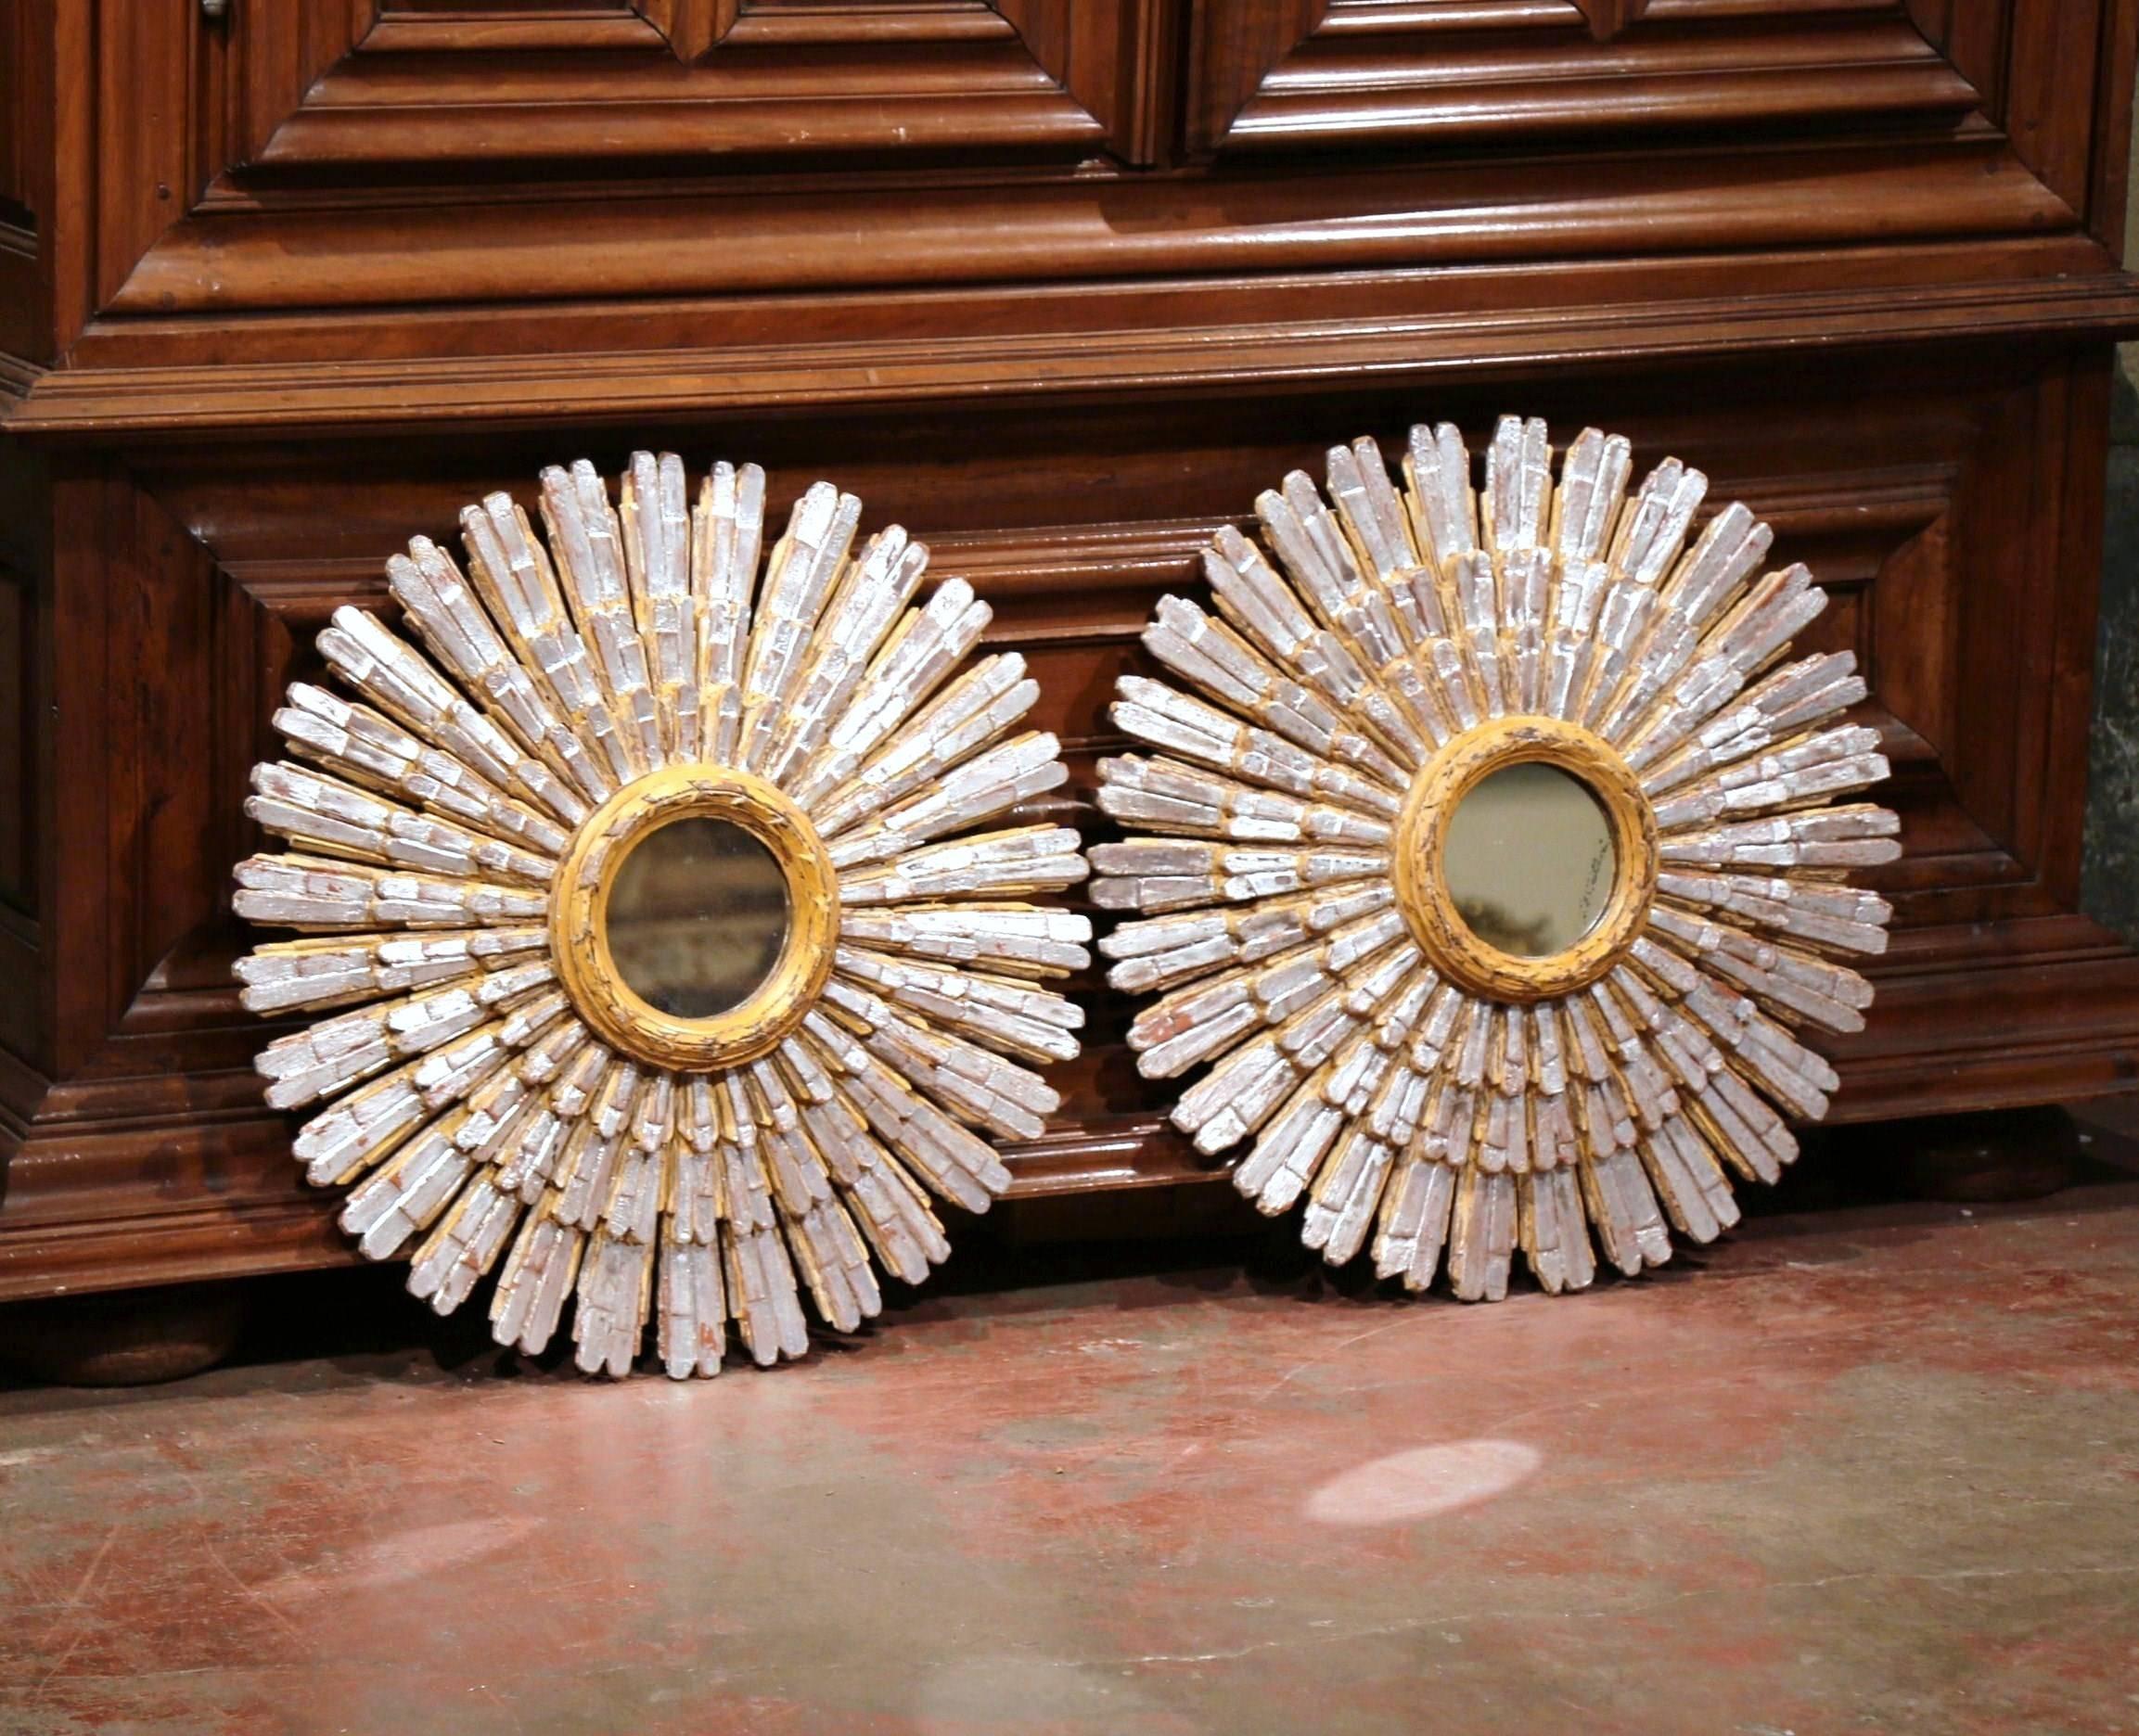 This large pair of vintage sunburst mirrors were carved and painted in France, circa 1940. Each ornate wall hanging mirror features a small round center glass with a two-tone paint finish. The sun rays shooting out from the central mirror are very